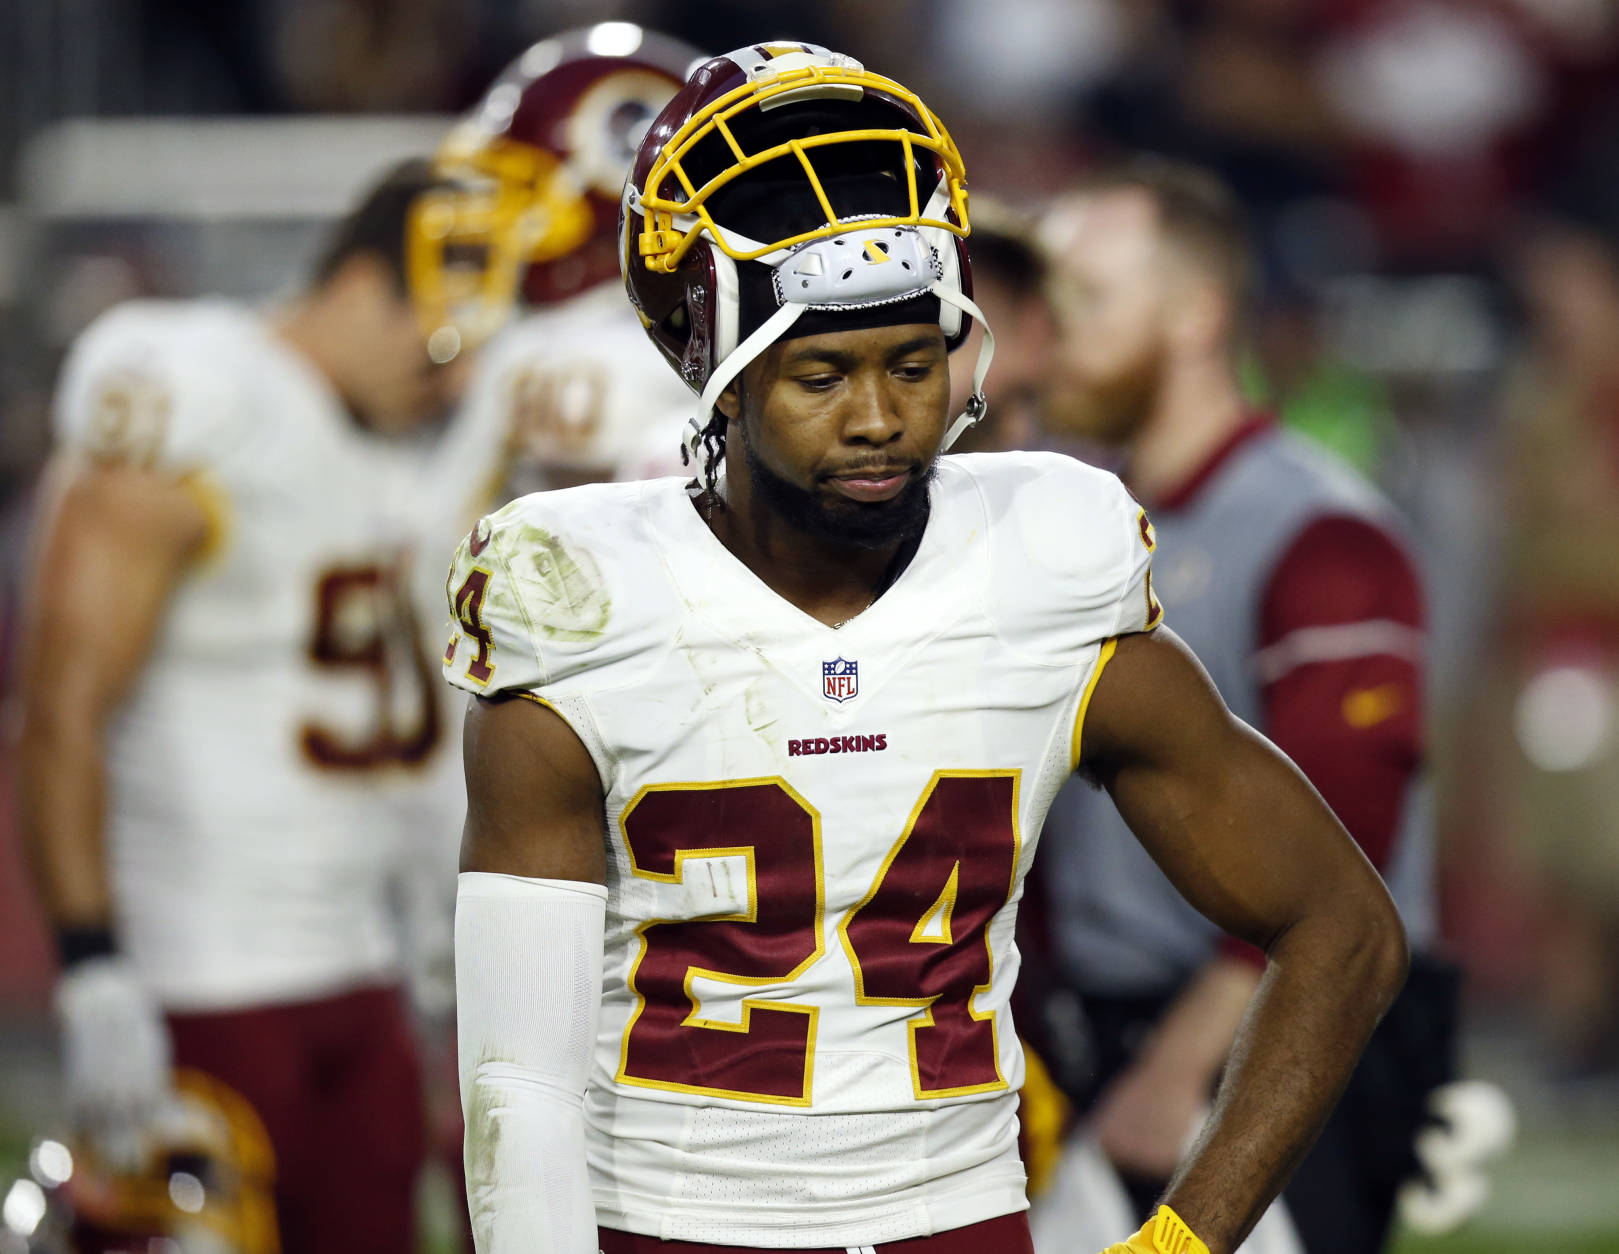 Washington Redskins cornerback Josh Norman (24) looks down as time expires during the second half of an NFL football game against the Arizona Cardinals, Sunday, Dec. 4, 2016, in Glendale, Ariz. The Cardinals won 31-23. (AP Photo/Ross D. Franklin)